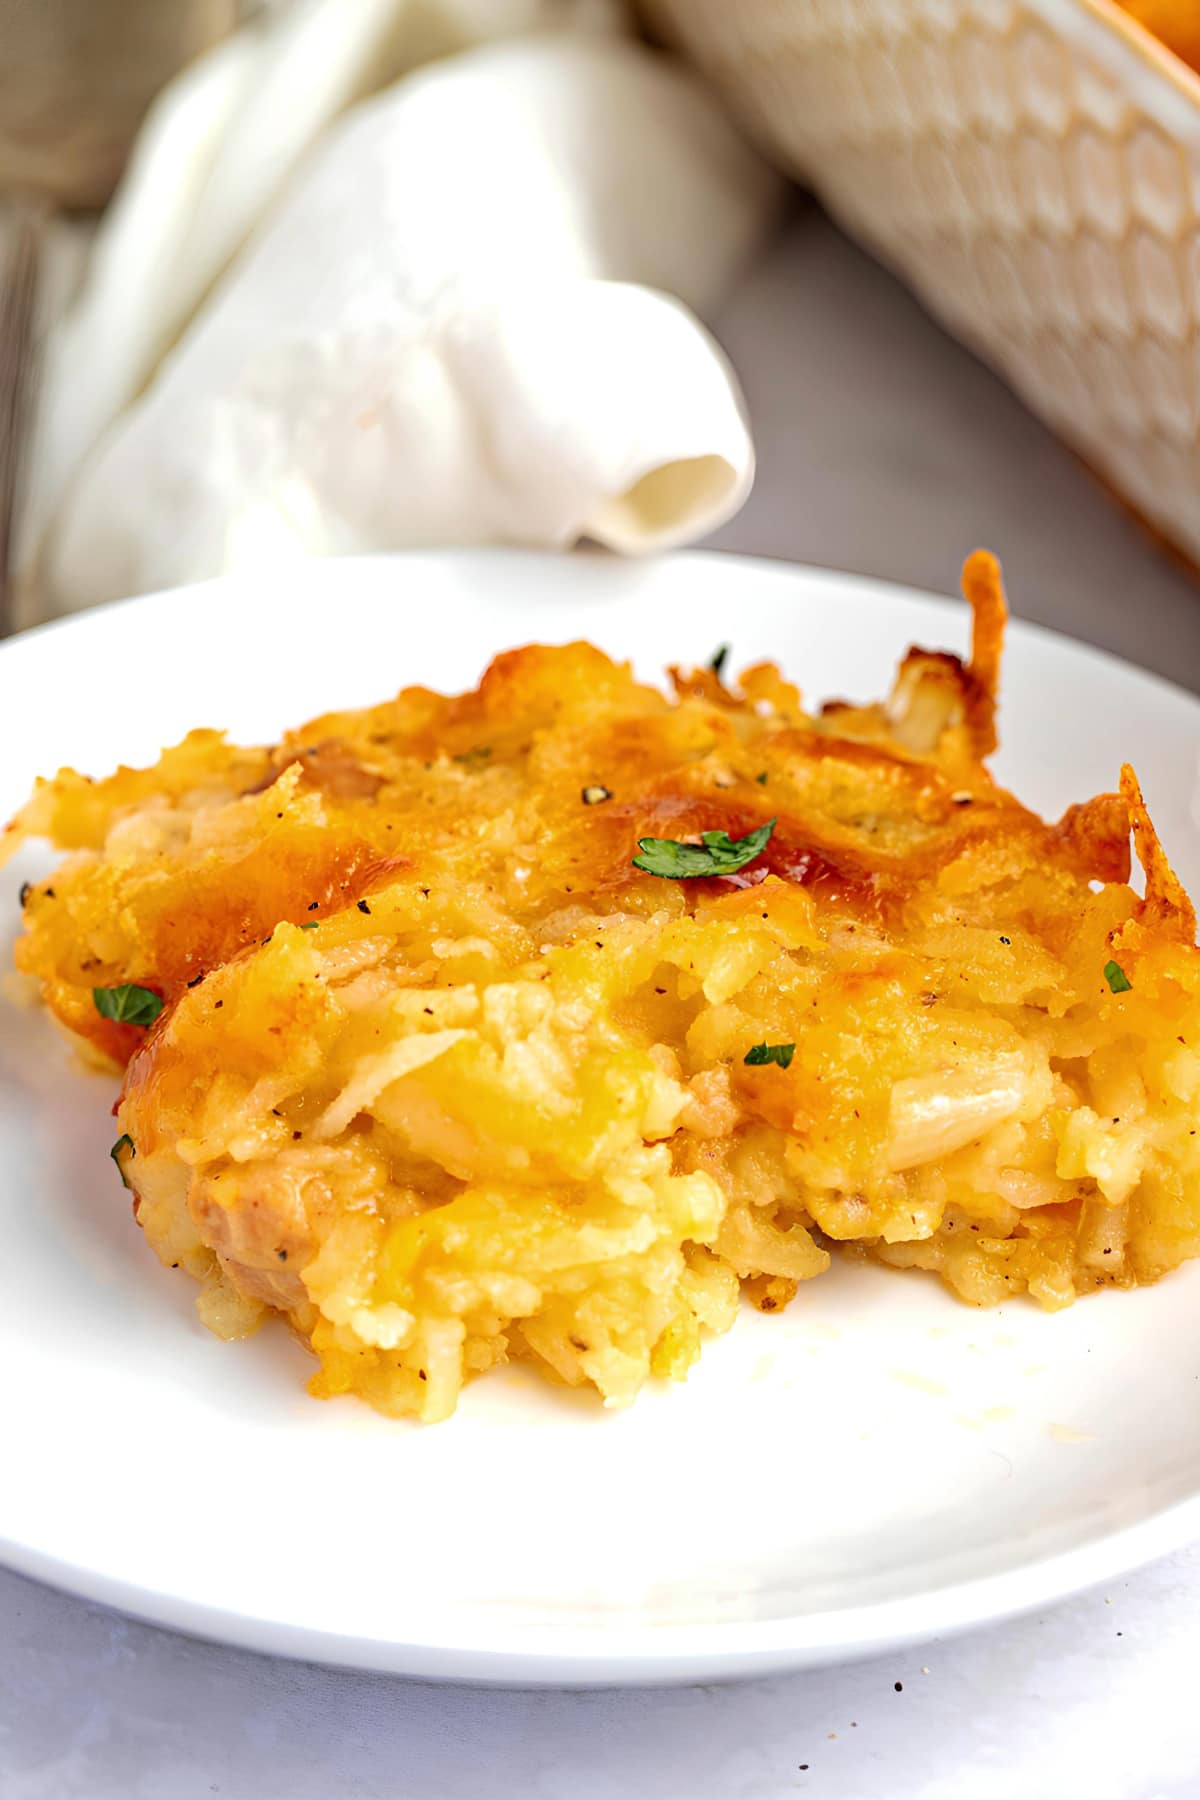 A serving of cheesy Hash brown casserole on a white saucer.